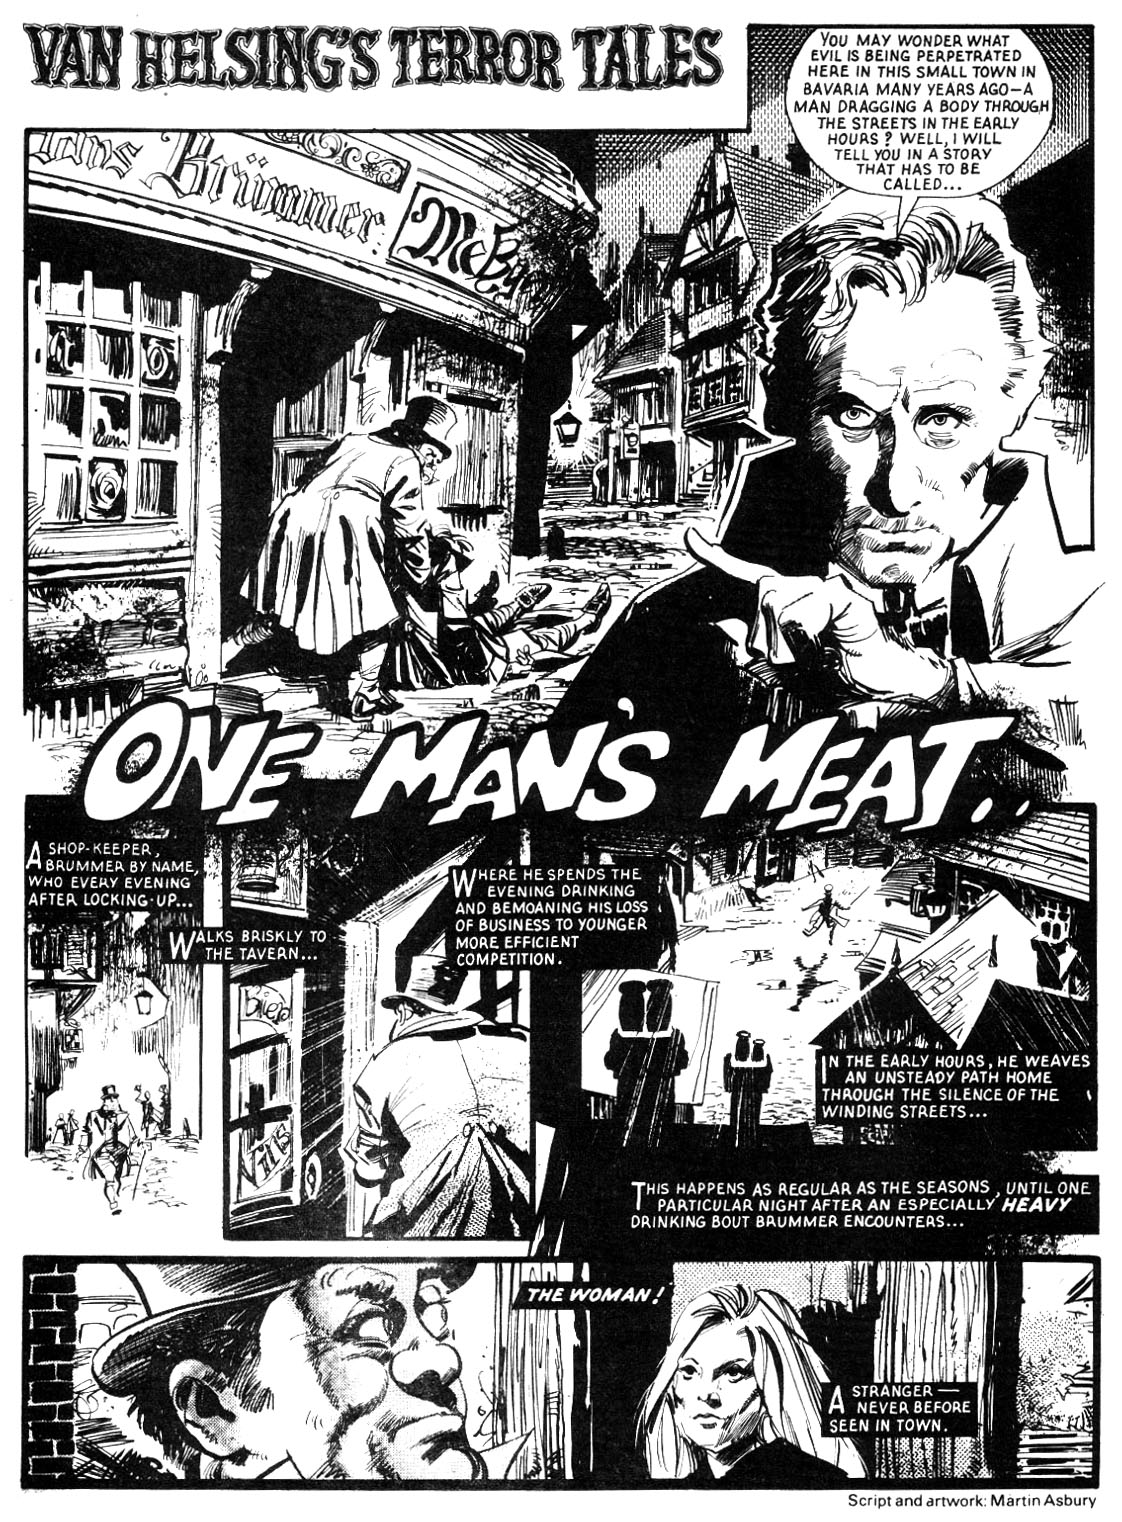 Martin Asbury wrote and drew "One Man's Meat" for House of Hammer